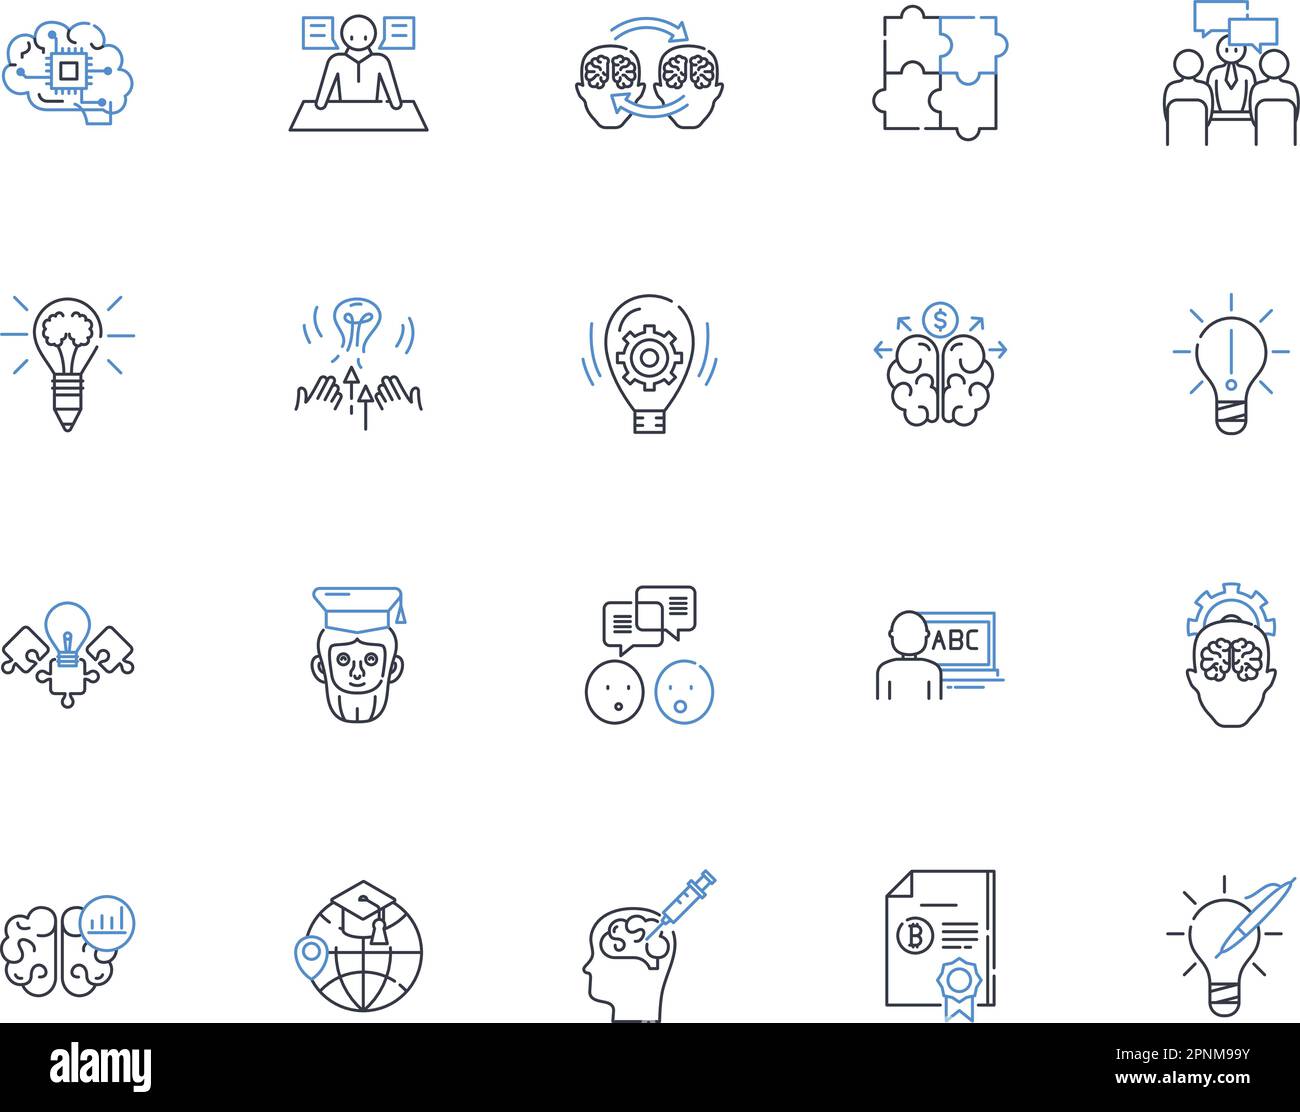 Cognitive style line icons collection. Perception, Learning, Processing, Analysis, Synthesis, Attention, Memory vector and linear illustration Stock Vector